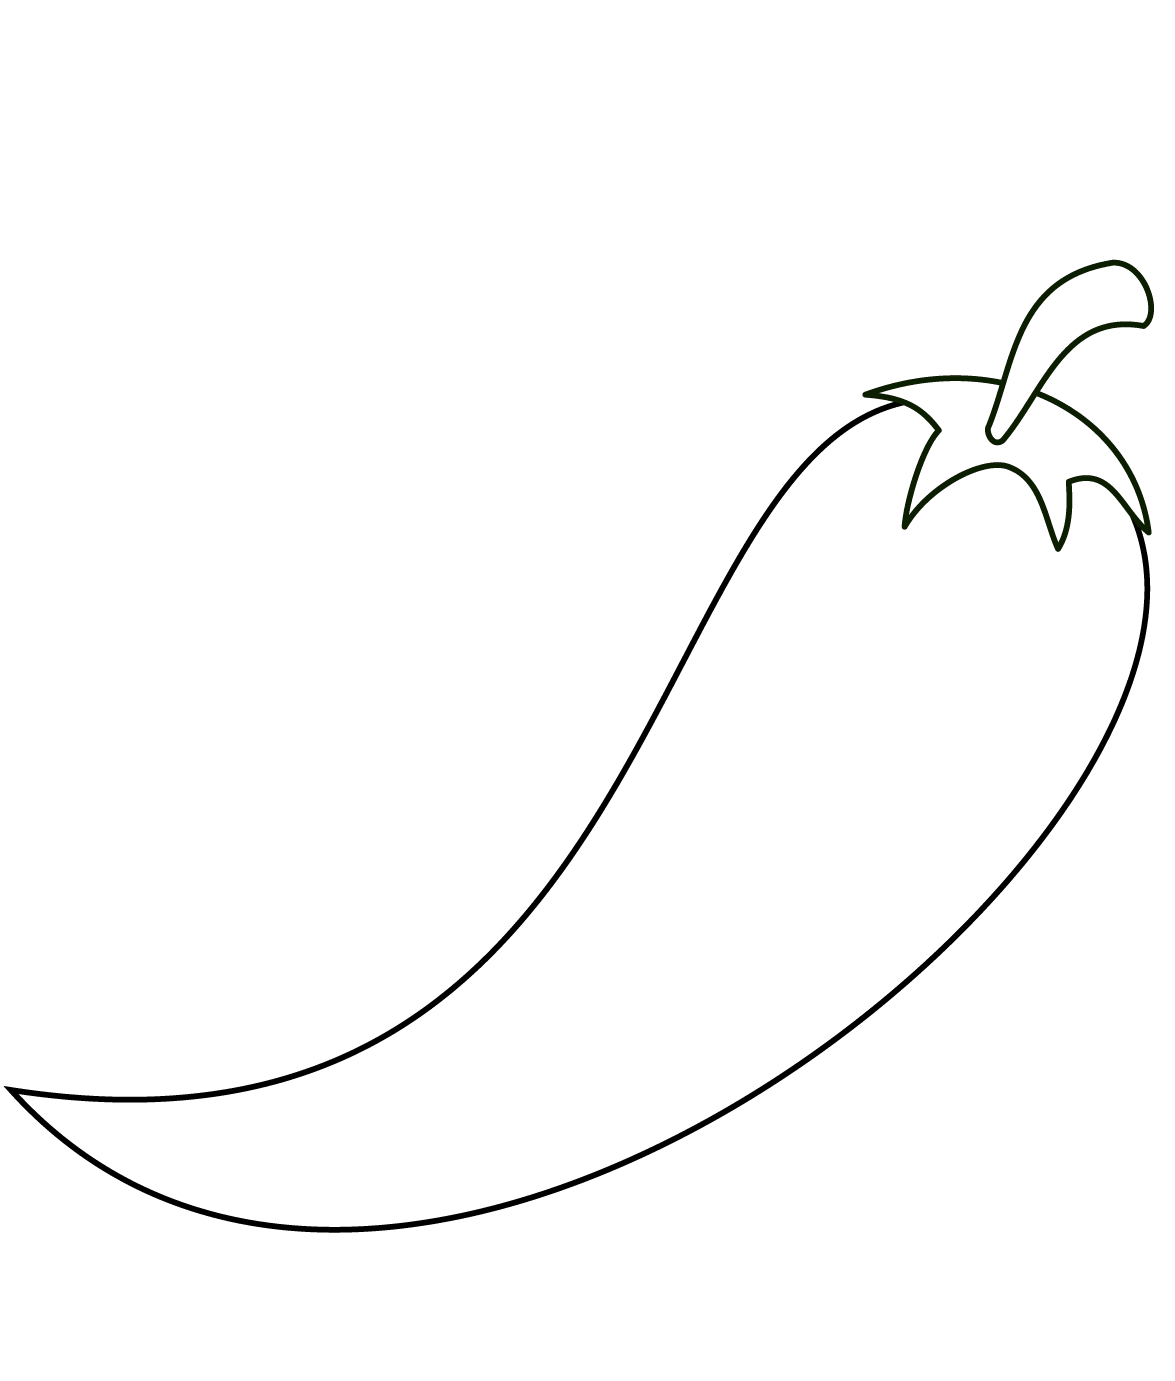 Chili coloring page